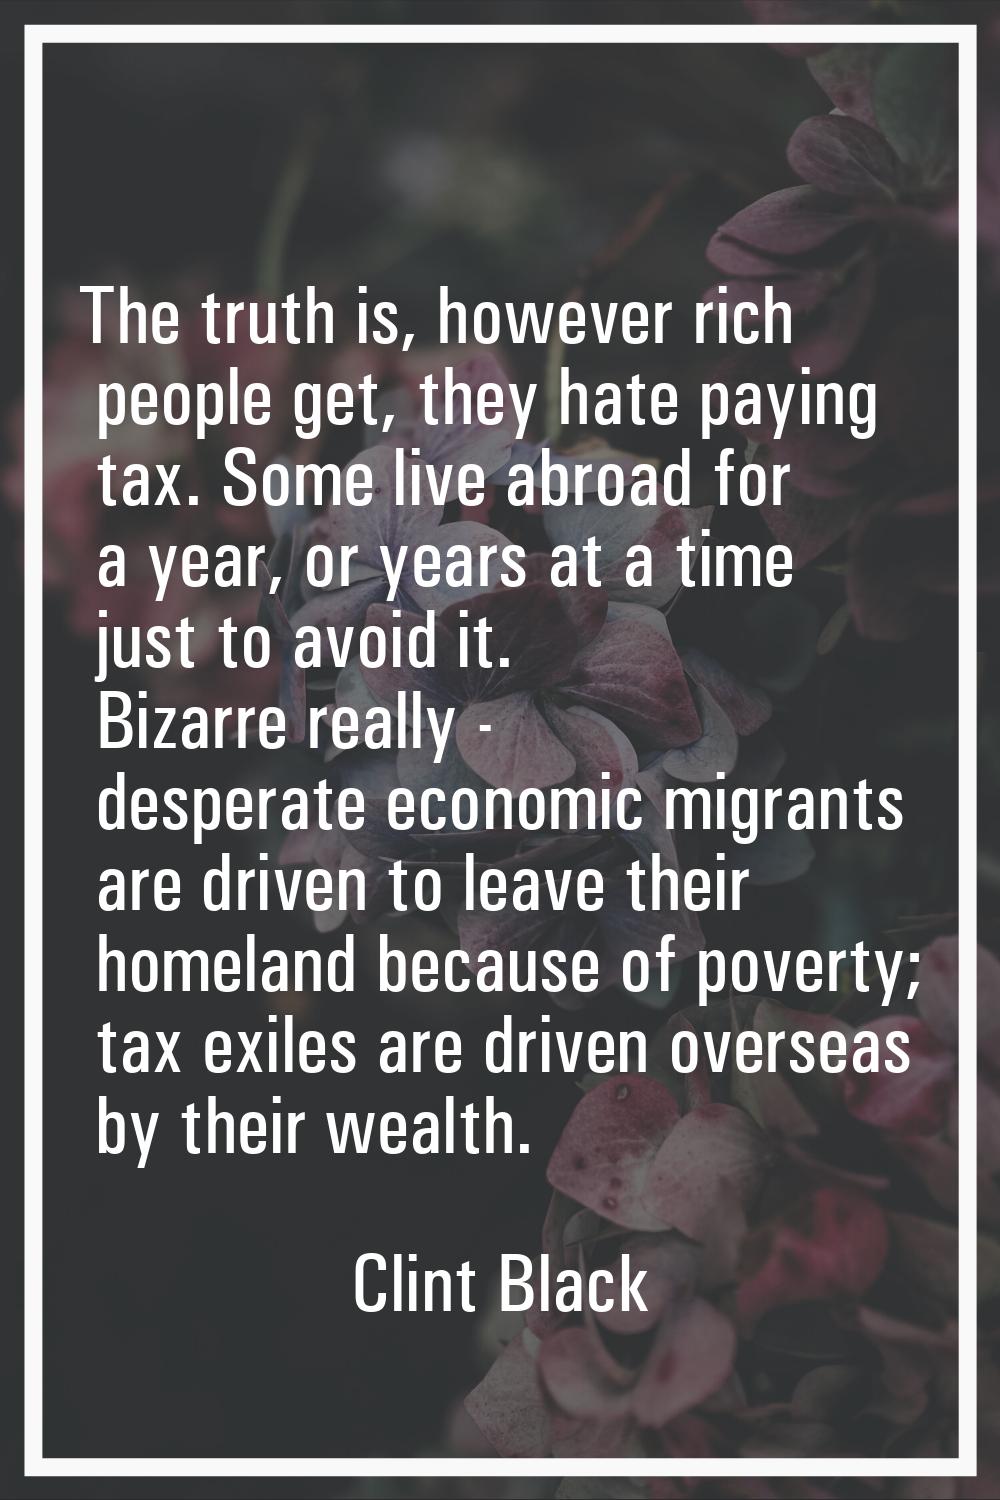 The truth is, however rich people get, they hate paying tax. Some live abroad for a year, or years 